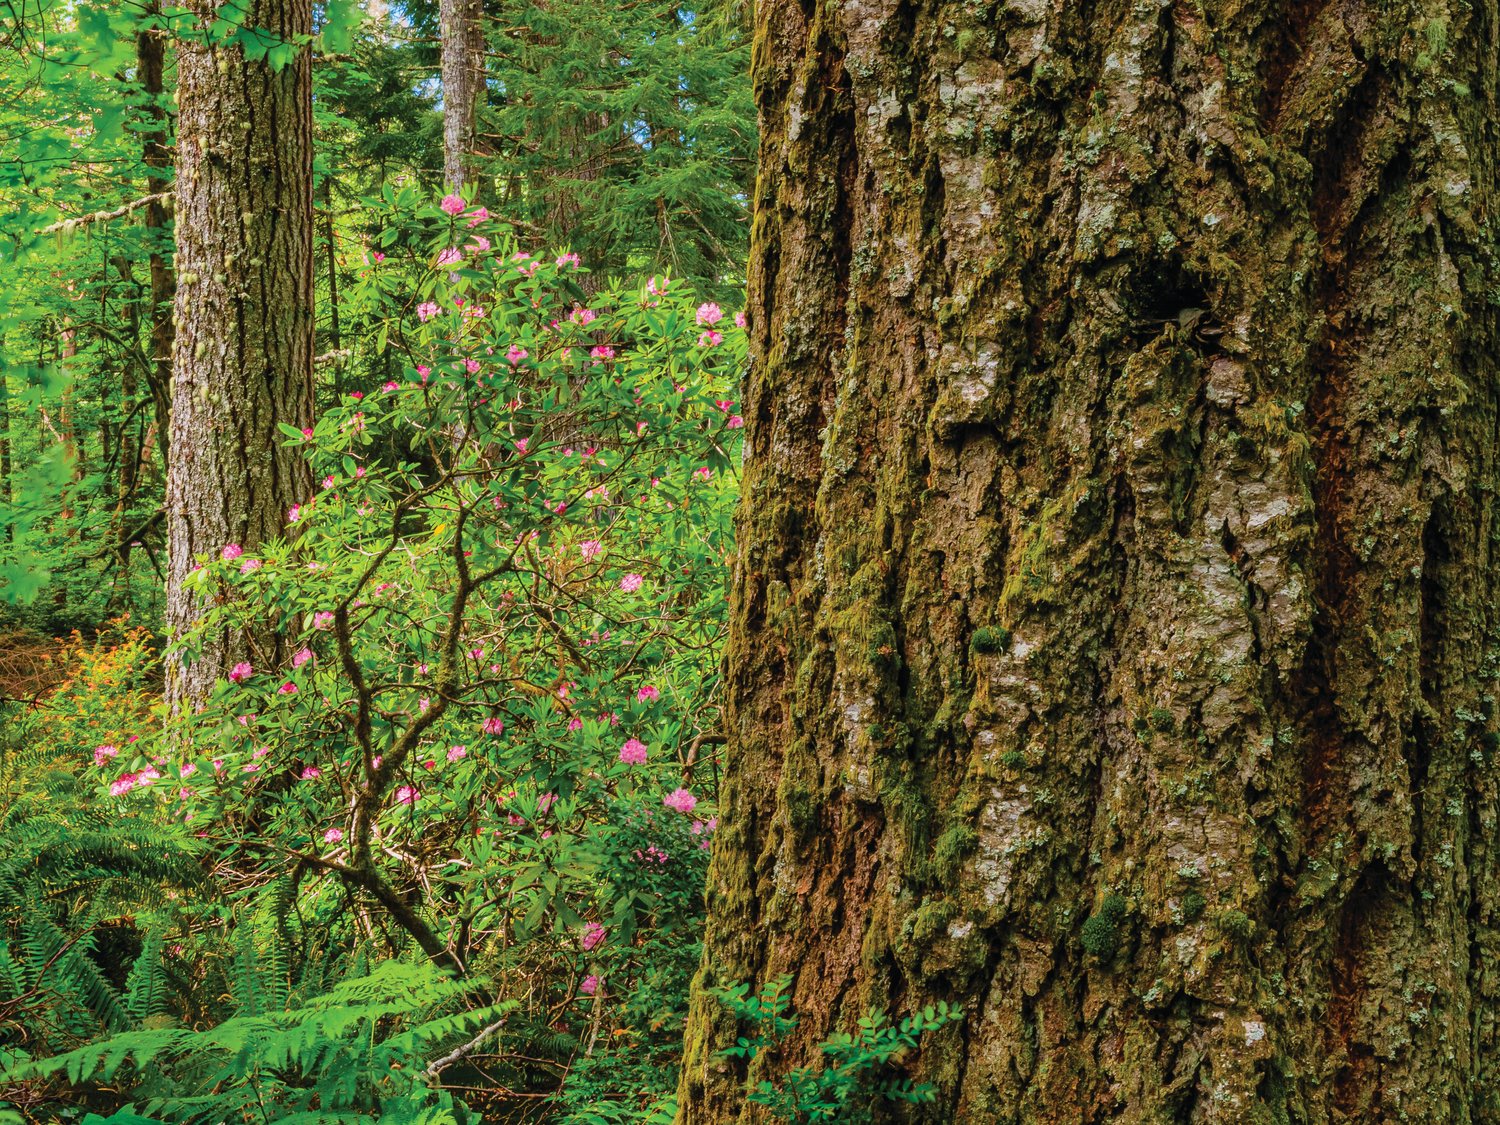 Rare forests recently discovered on the Toandos Peninsula near Dabob Bay include rhododendron, Douglas fir, western hemlock and evergreen huckleberry